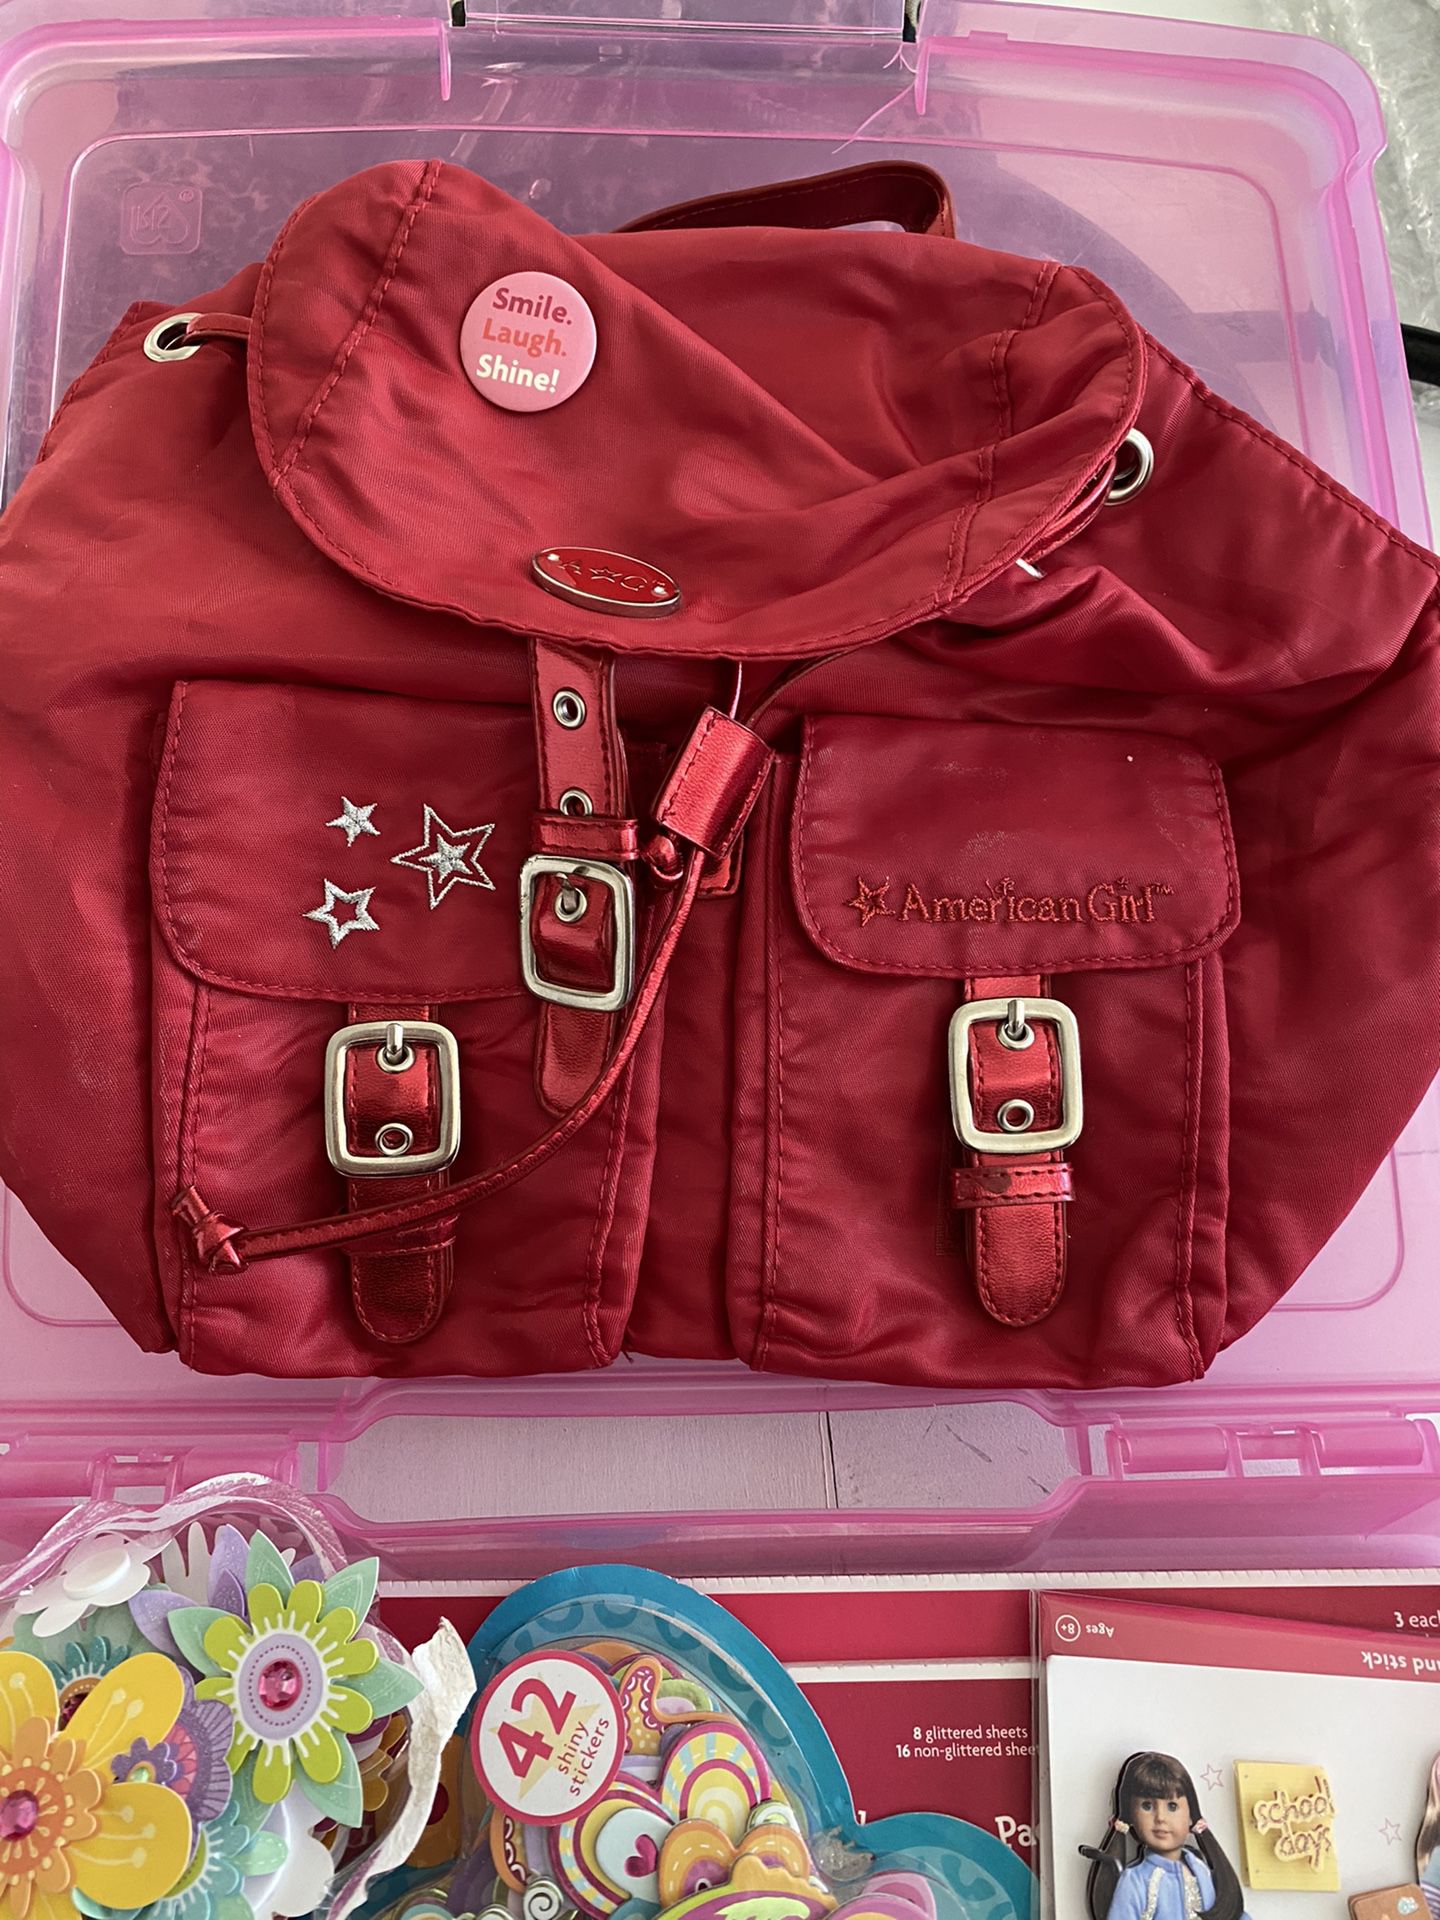 American Girl Doll collectibles